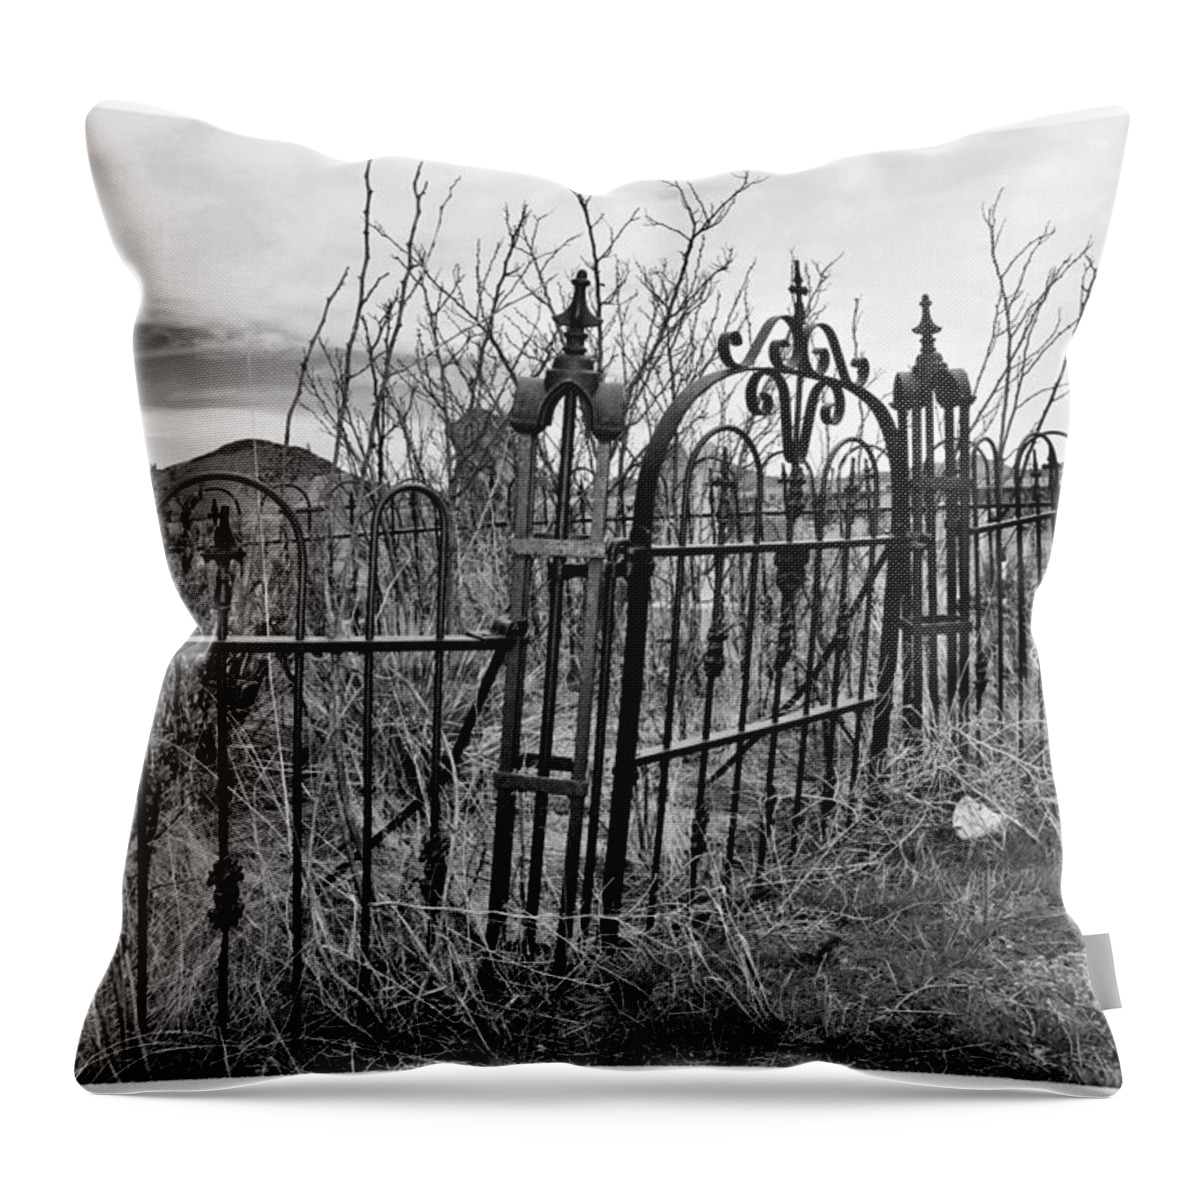 Cemetery B&w Throw Pillow featuring the photograph Leaning Cemetery Gate by Sandra Dalton